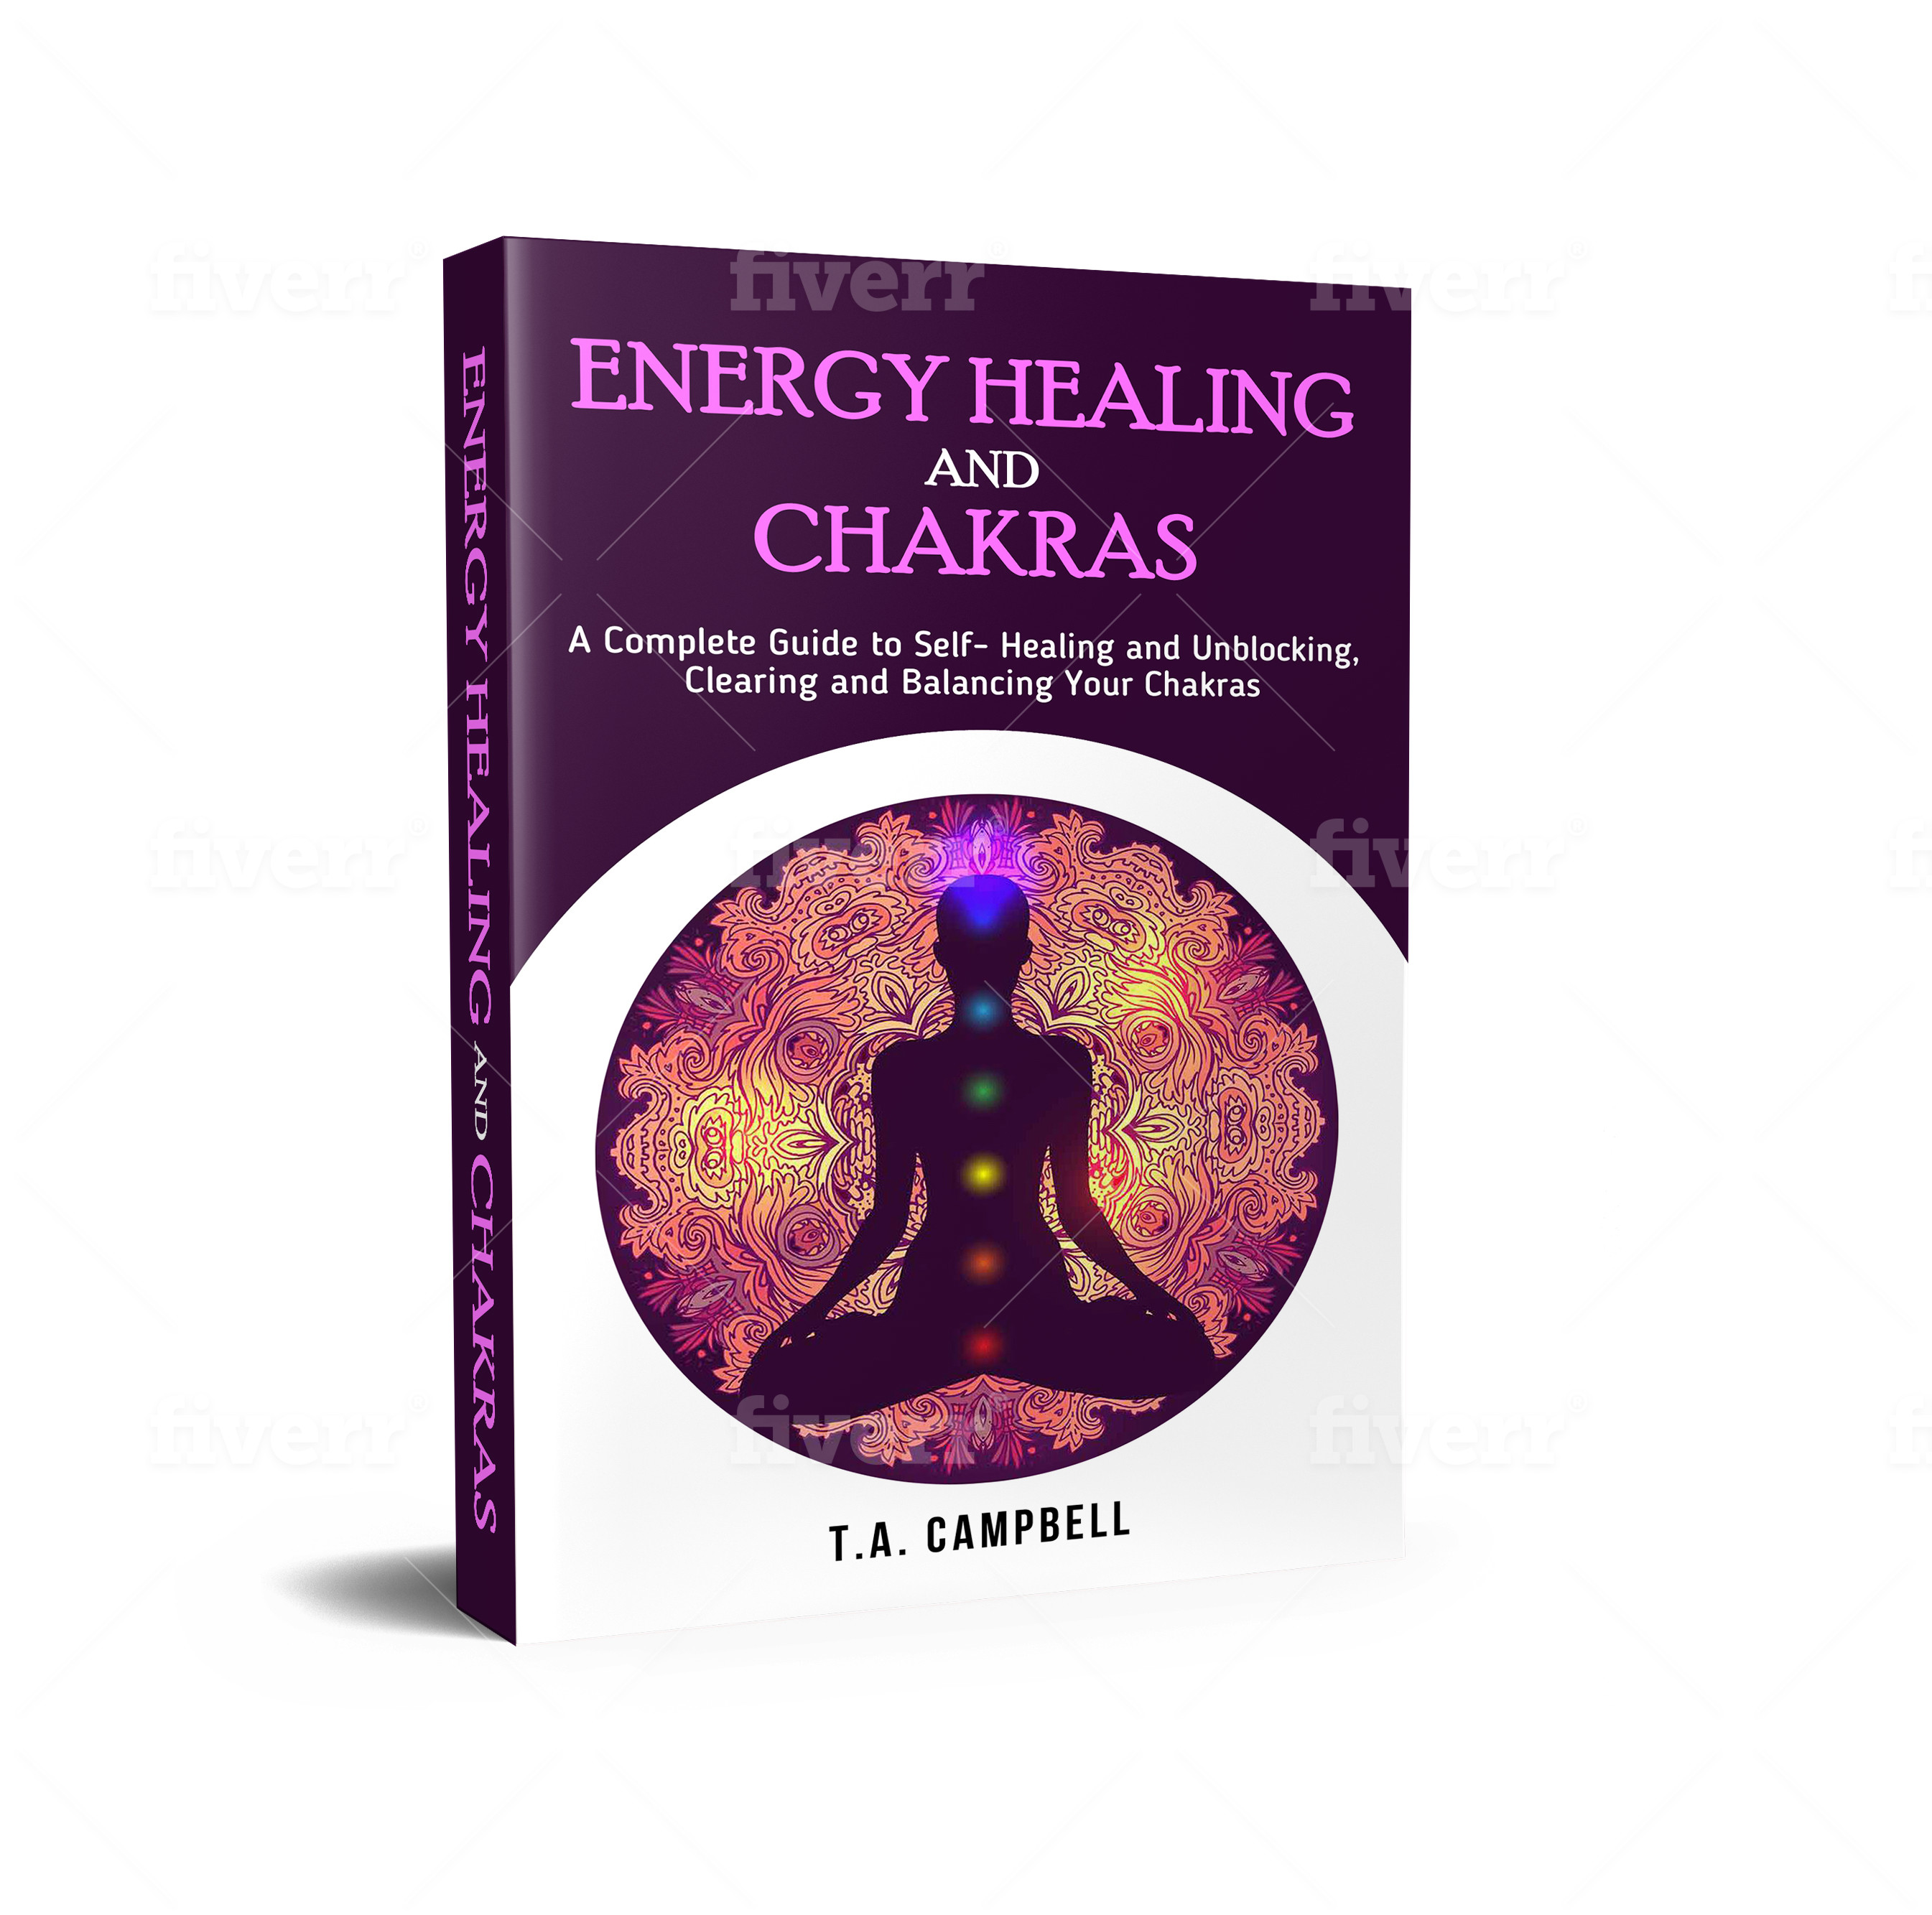 FREE: Energy Healing and Chakras: A Complete Guide to Self- Healing and Unblocking, Clearing and Balancing Your Chakras by T.A. Campbell